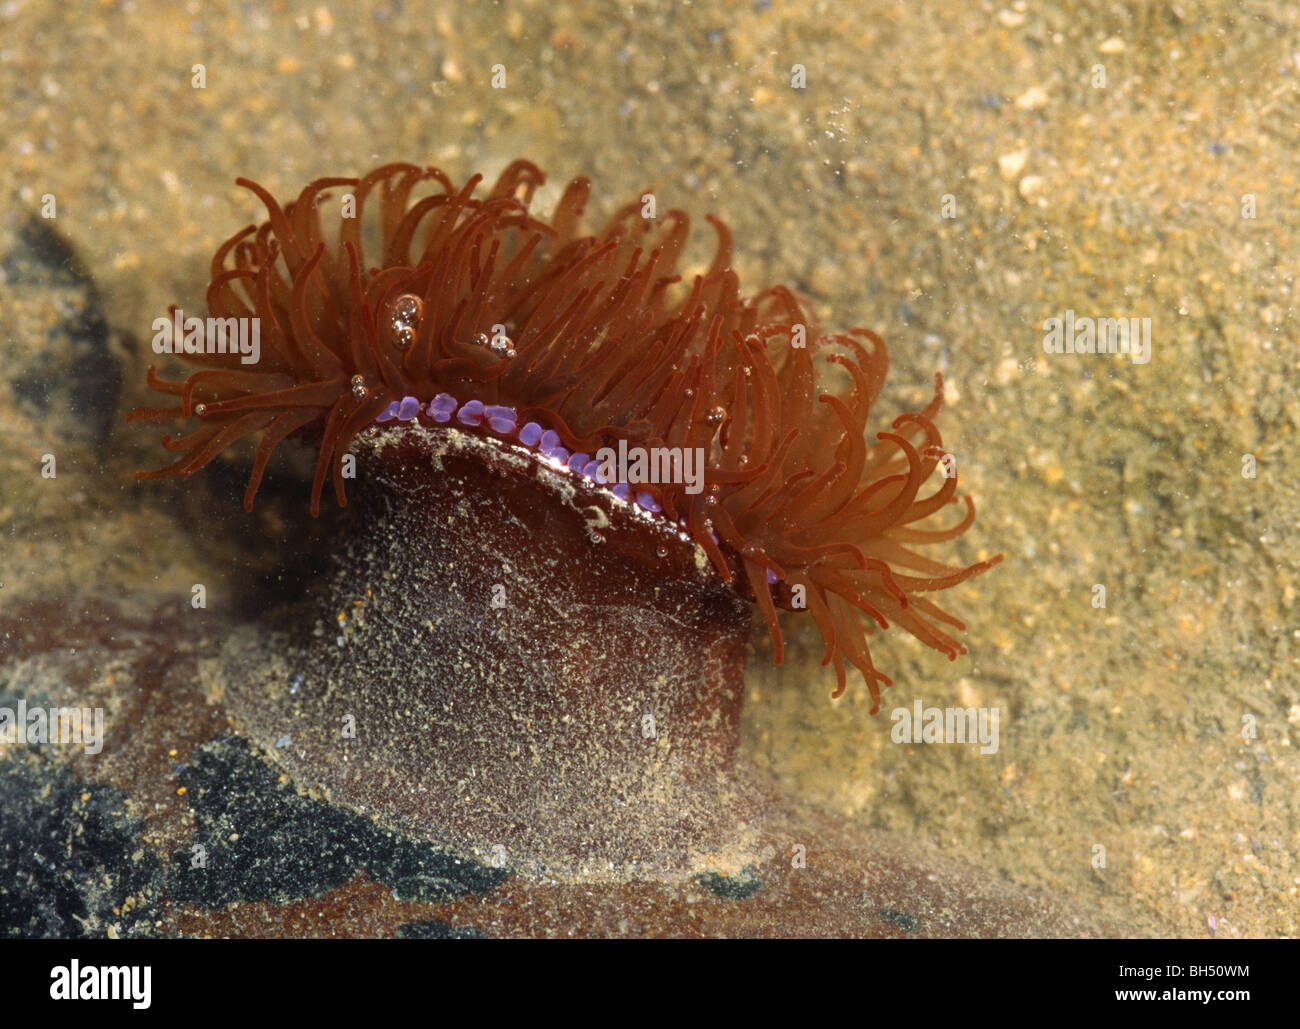 Close-up of a beadlet anemone (Actinia equine) attached to a rock in a rock pool. Stock Photo